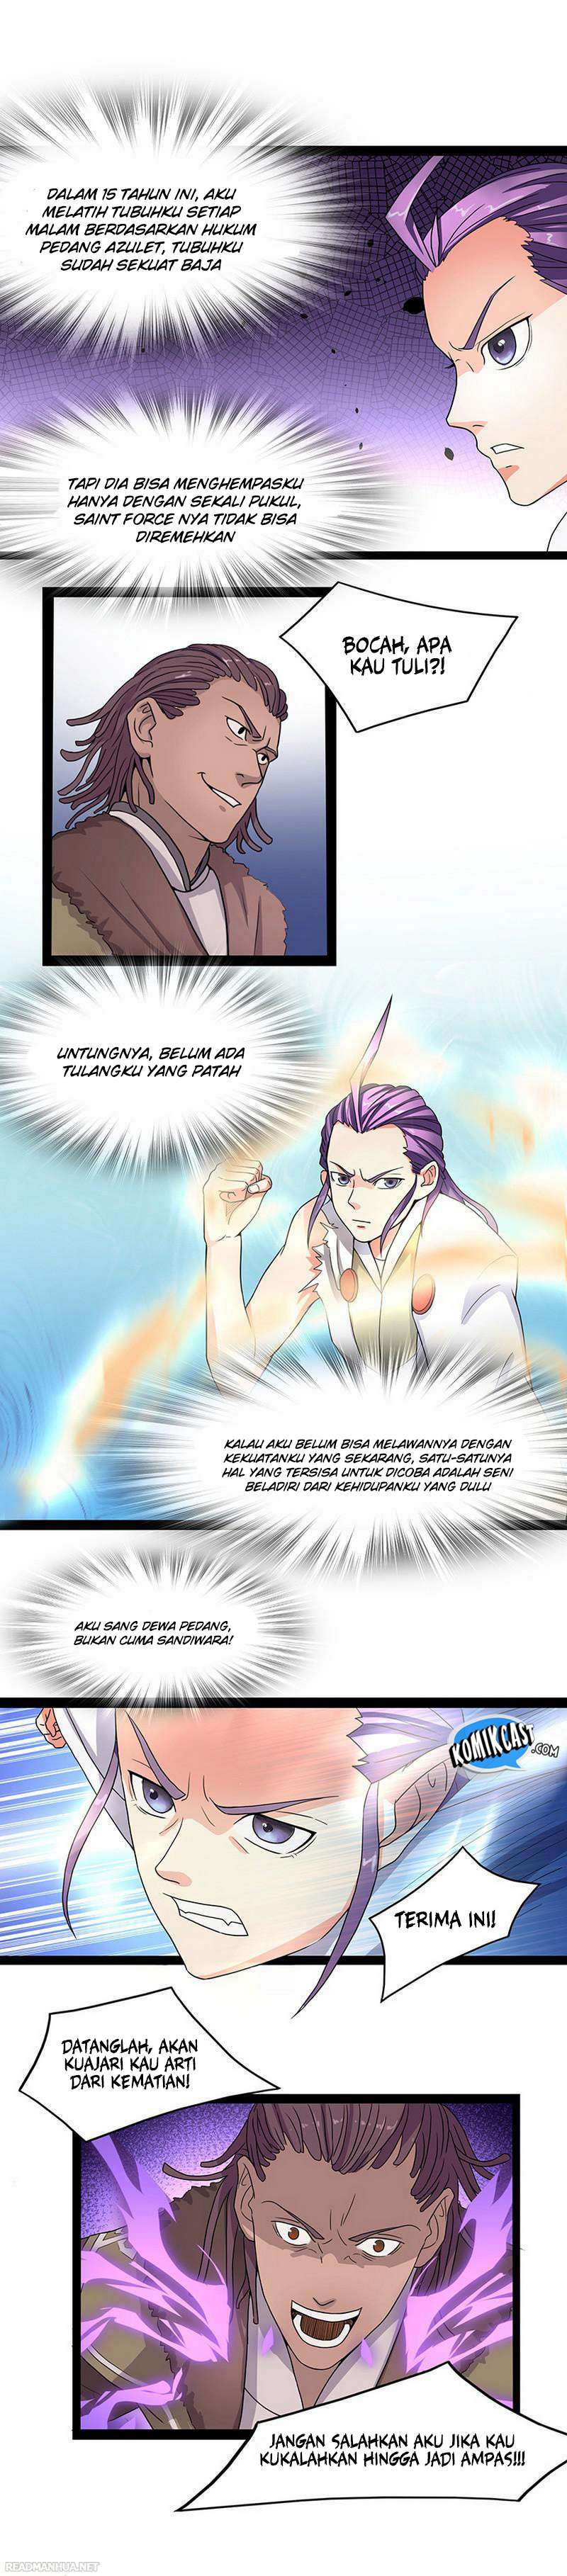 Chaotic Sword God Chapter 07